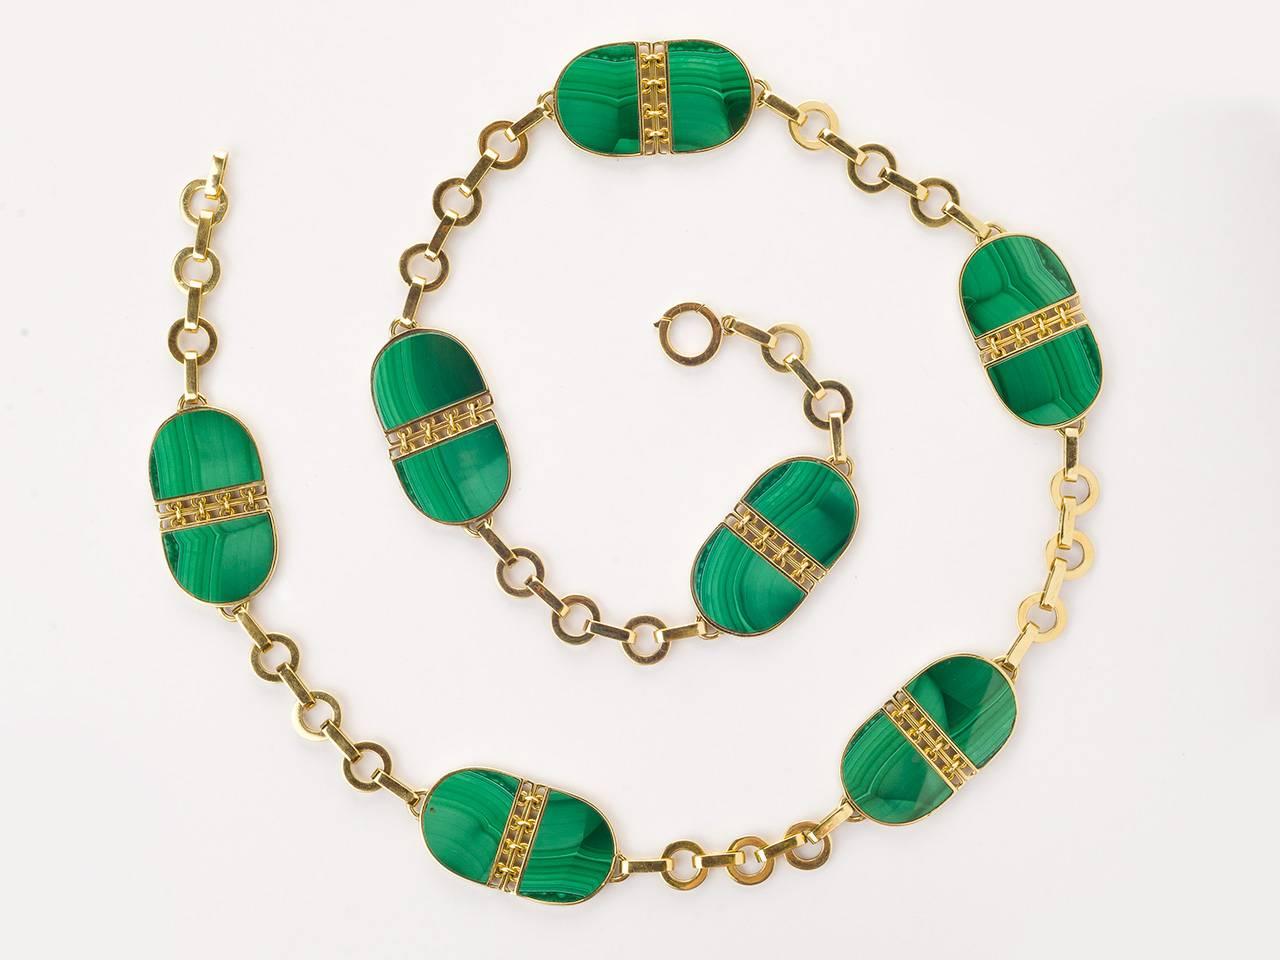 18kt gold chain necklace set with double-sided malachite plaques with gold work centers. Signed 750 with maker's mark.